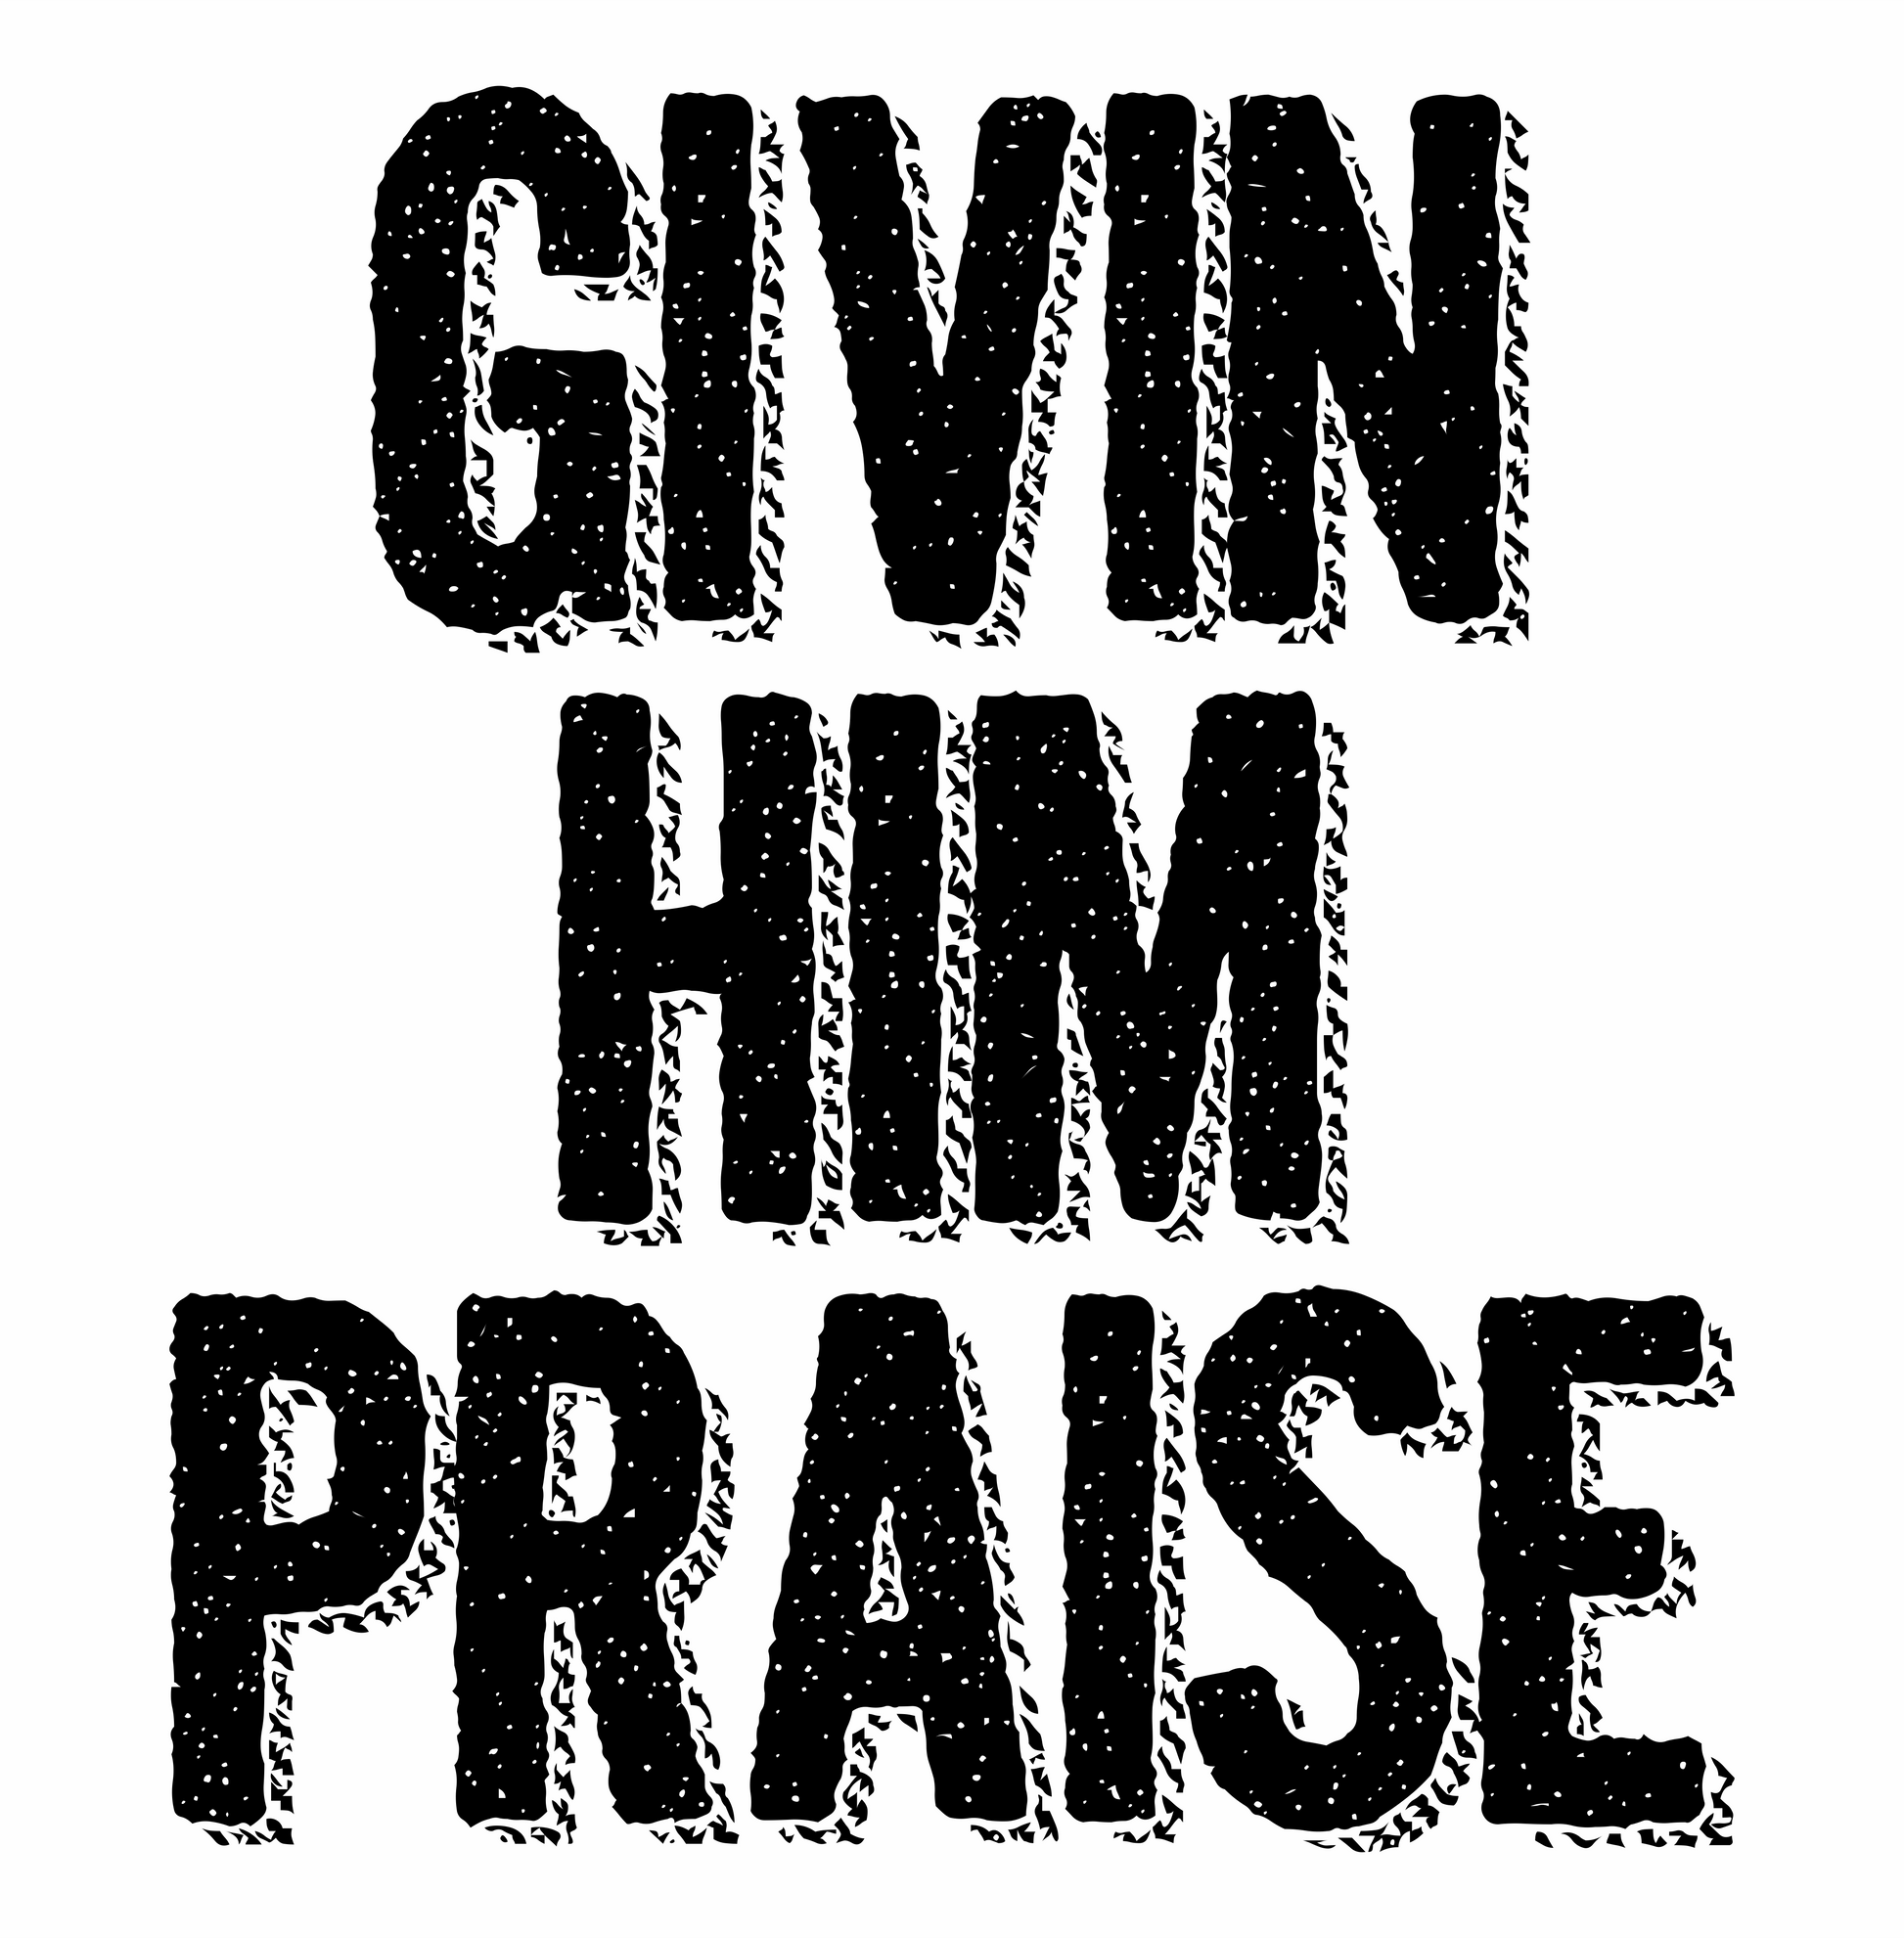 giving him praise music note DTG design back graphic